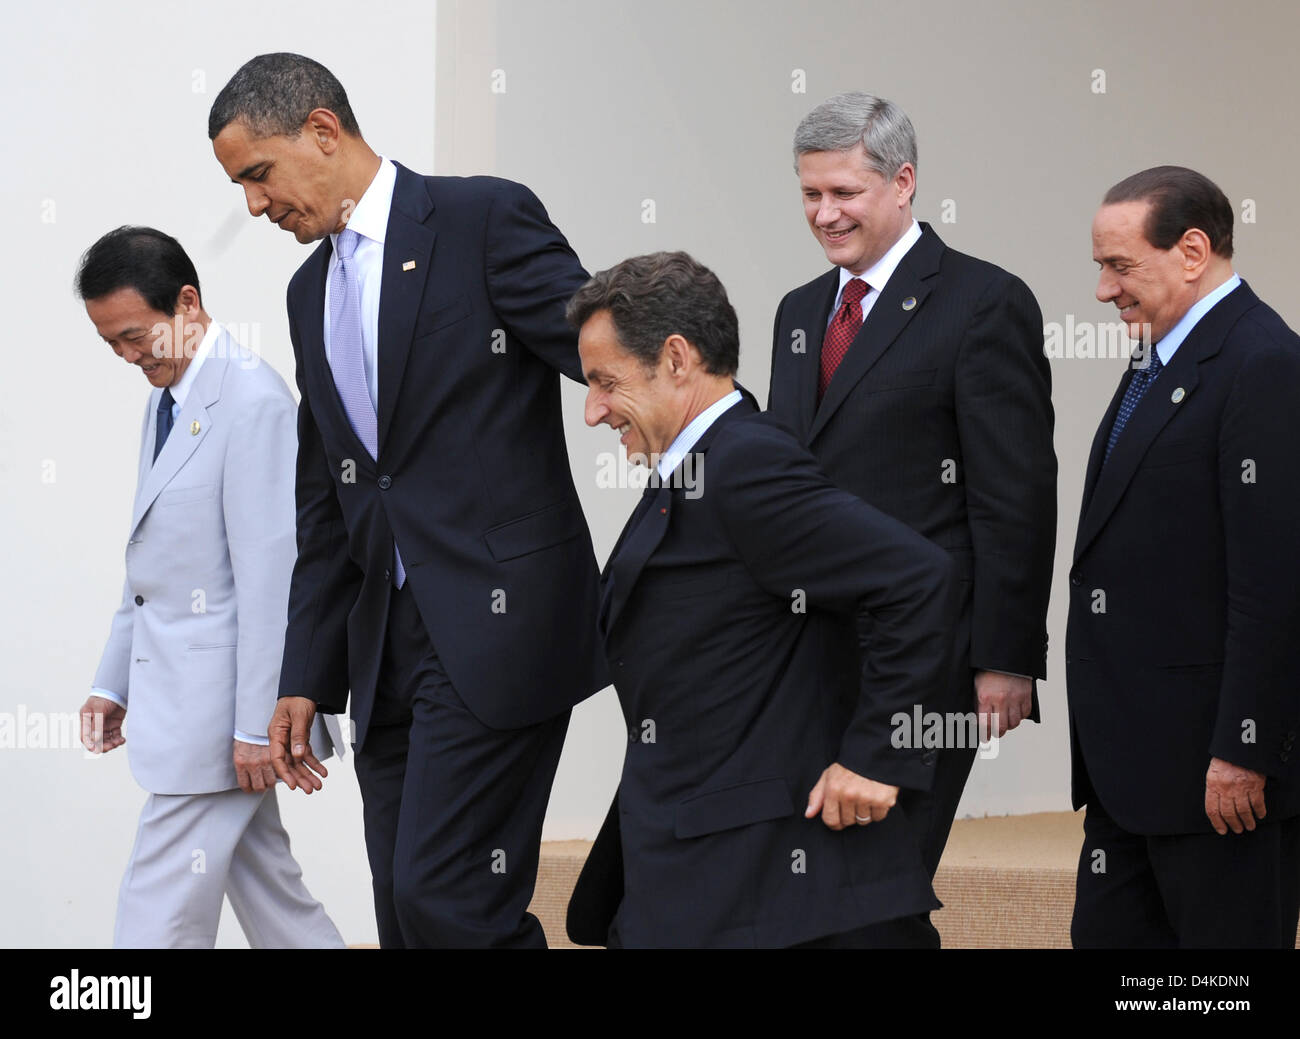 The Heads of Government of Japan, Taro Aso (L-R), of USA, Barack Obama, of France, Nicolas Sarkozy, of Canada, Stephen Harper, and of Italy, Silvio Berlusconi, leave after a family photograph in L?Aquila, Italy, 08 July 2009. This year?s G8 Summit will take place in L?Aquila from 08 til 10 July 2009. Photo: PEER GRIMM Stock Photo